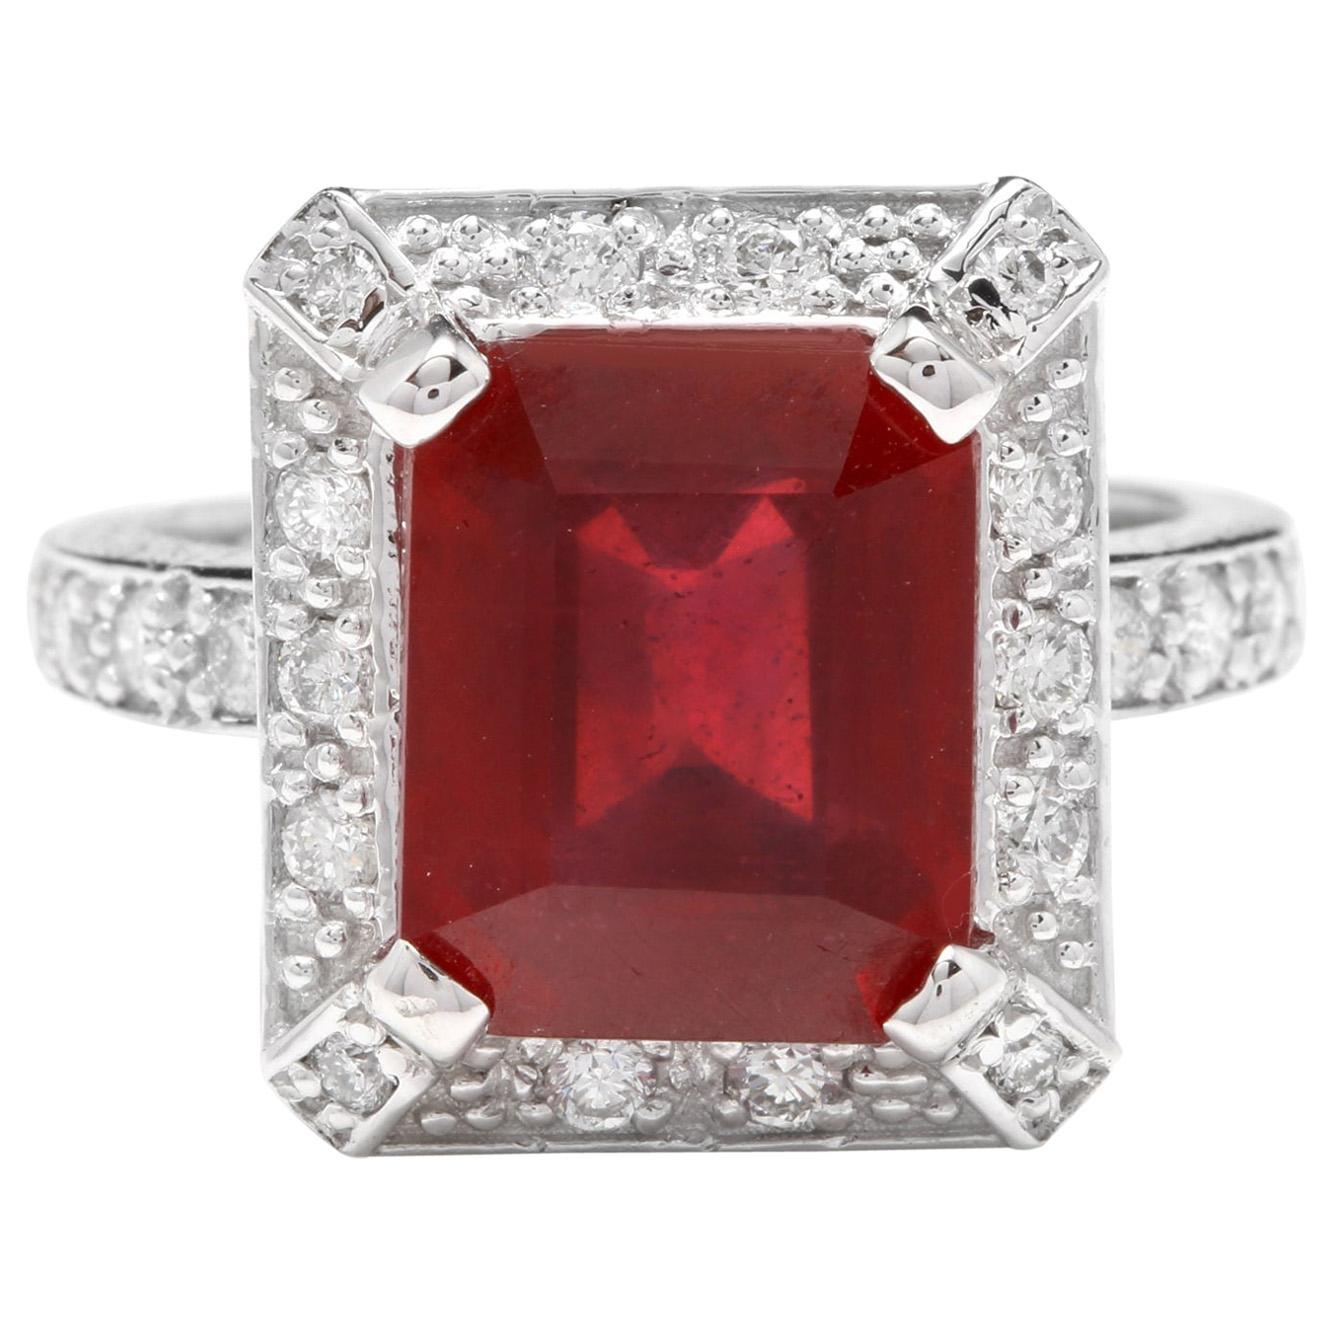 8.05 Carat Impressive Natural Red Ruby and Diamond 14 Karat White Gold Ring For Sale